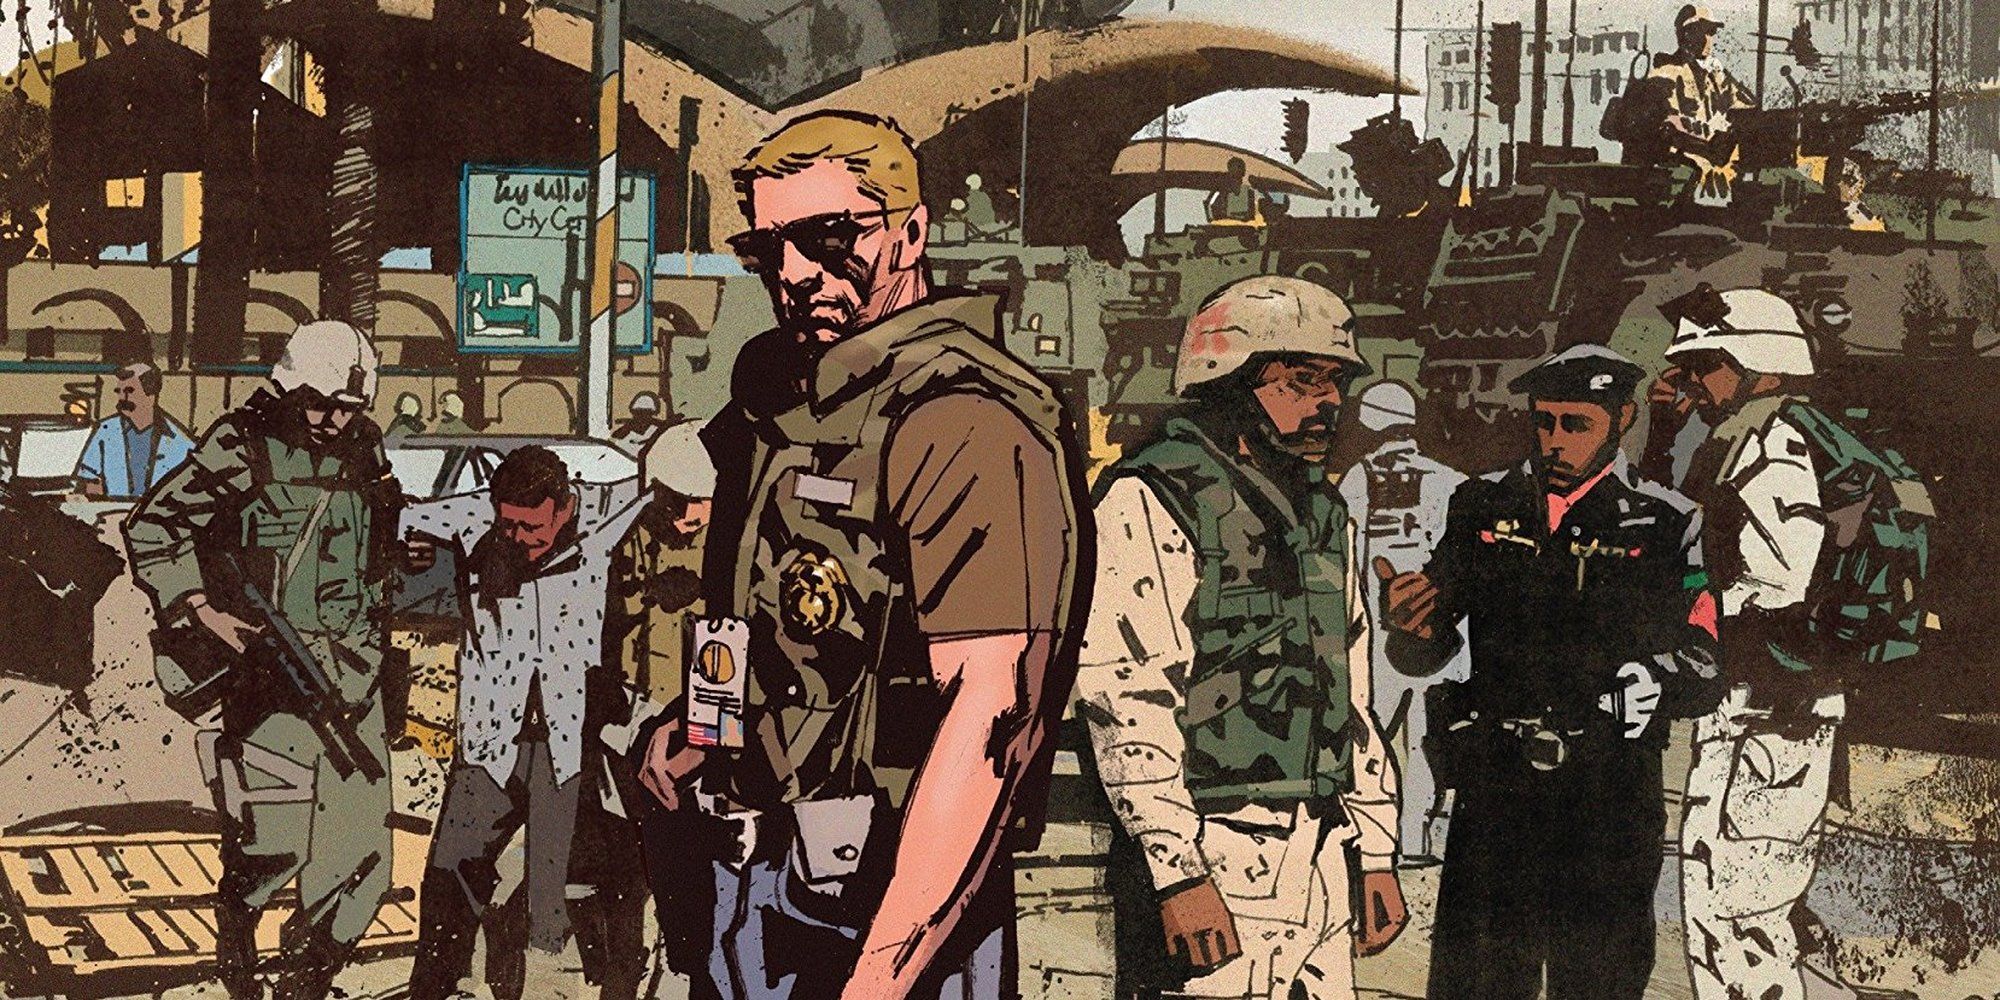 CIA agent examines his surroundings in Tom King's Sheriff of Babylon comic